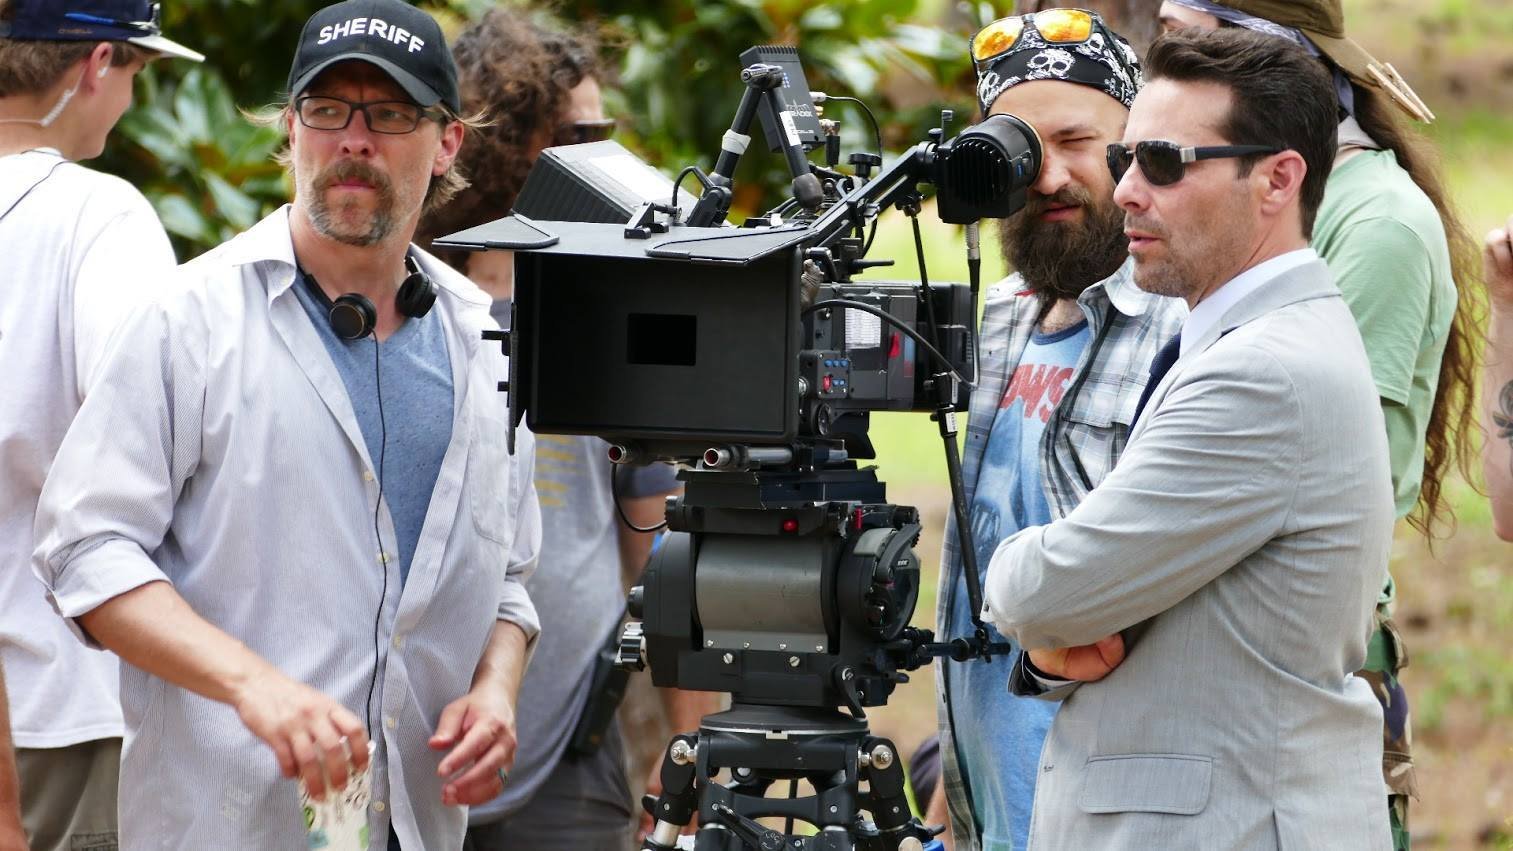 Director Miles Doleac (left) sets up a shot with Camera Operator, Derek Fisher (center), and James Callis (right).